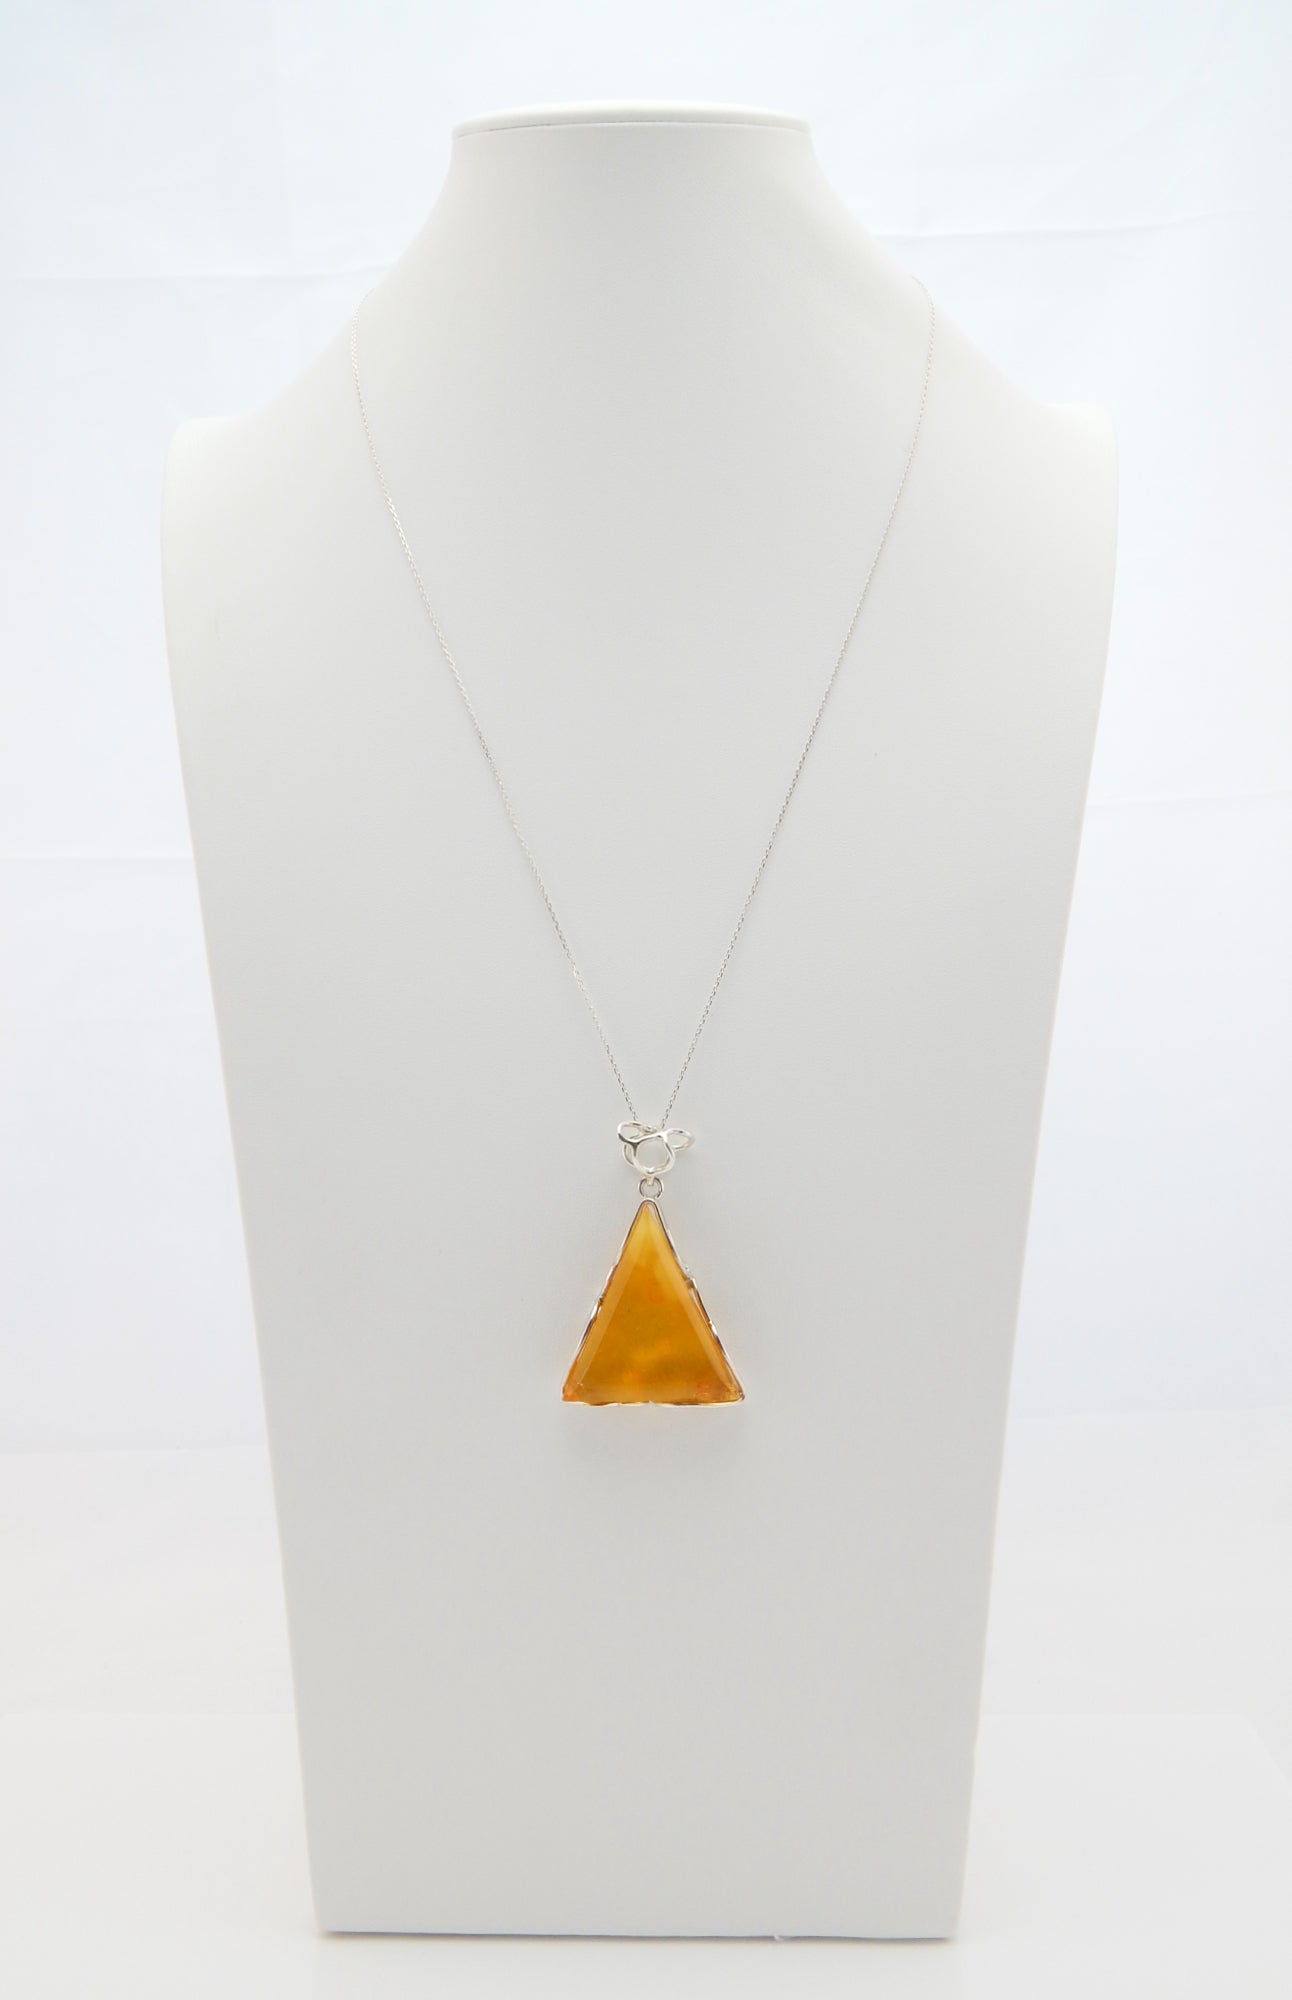 Handmade Natural Baltic Lemon Amber Triangular Pendant Necklace in 925 Sterling Silver